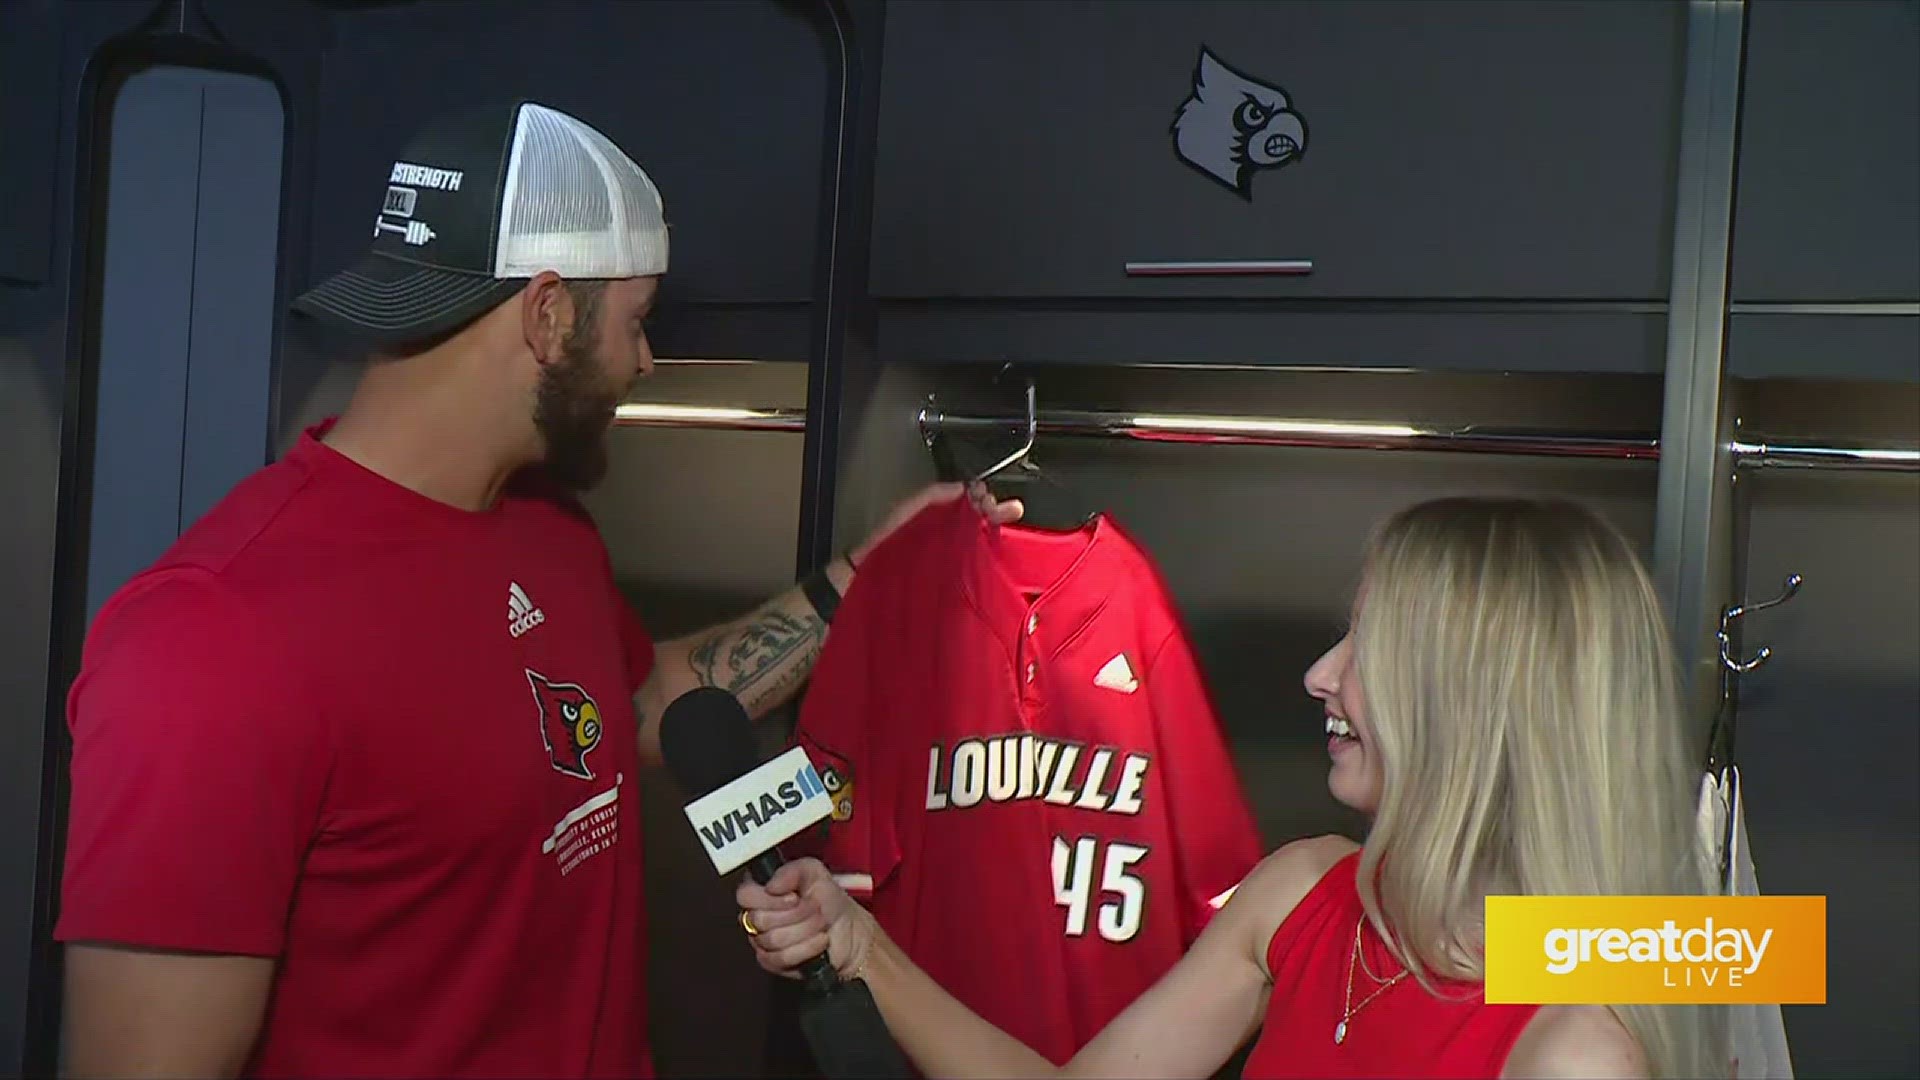 UofL Baseball Team has some new uniforms to wear for their game days this season!